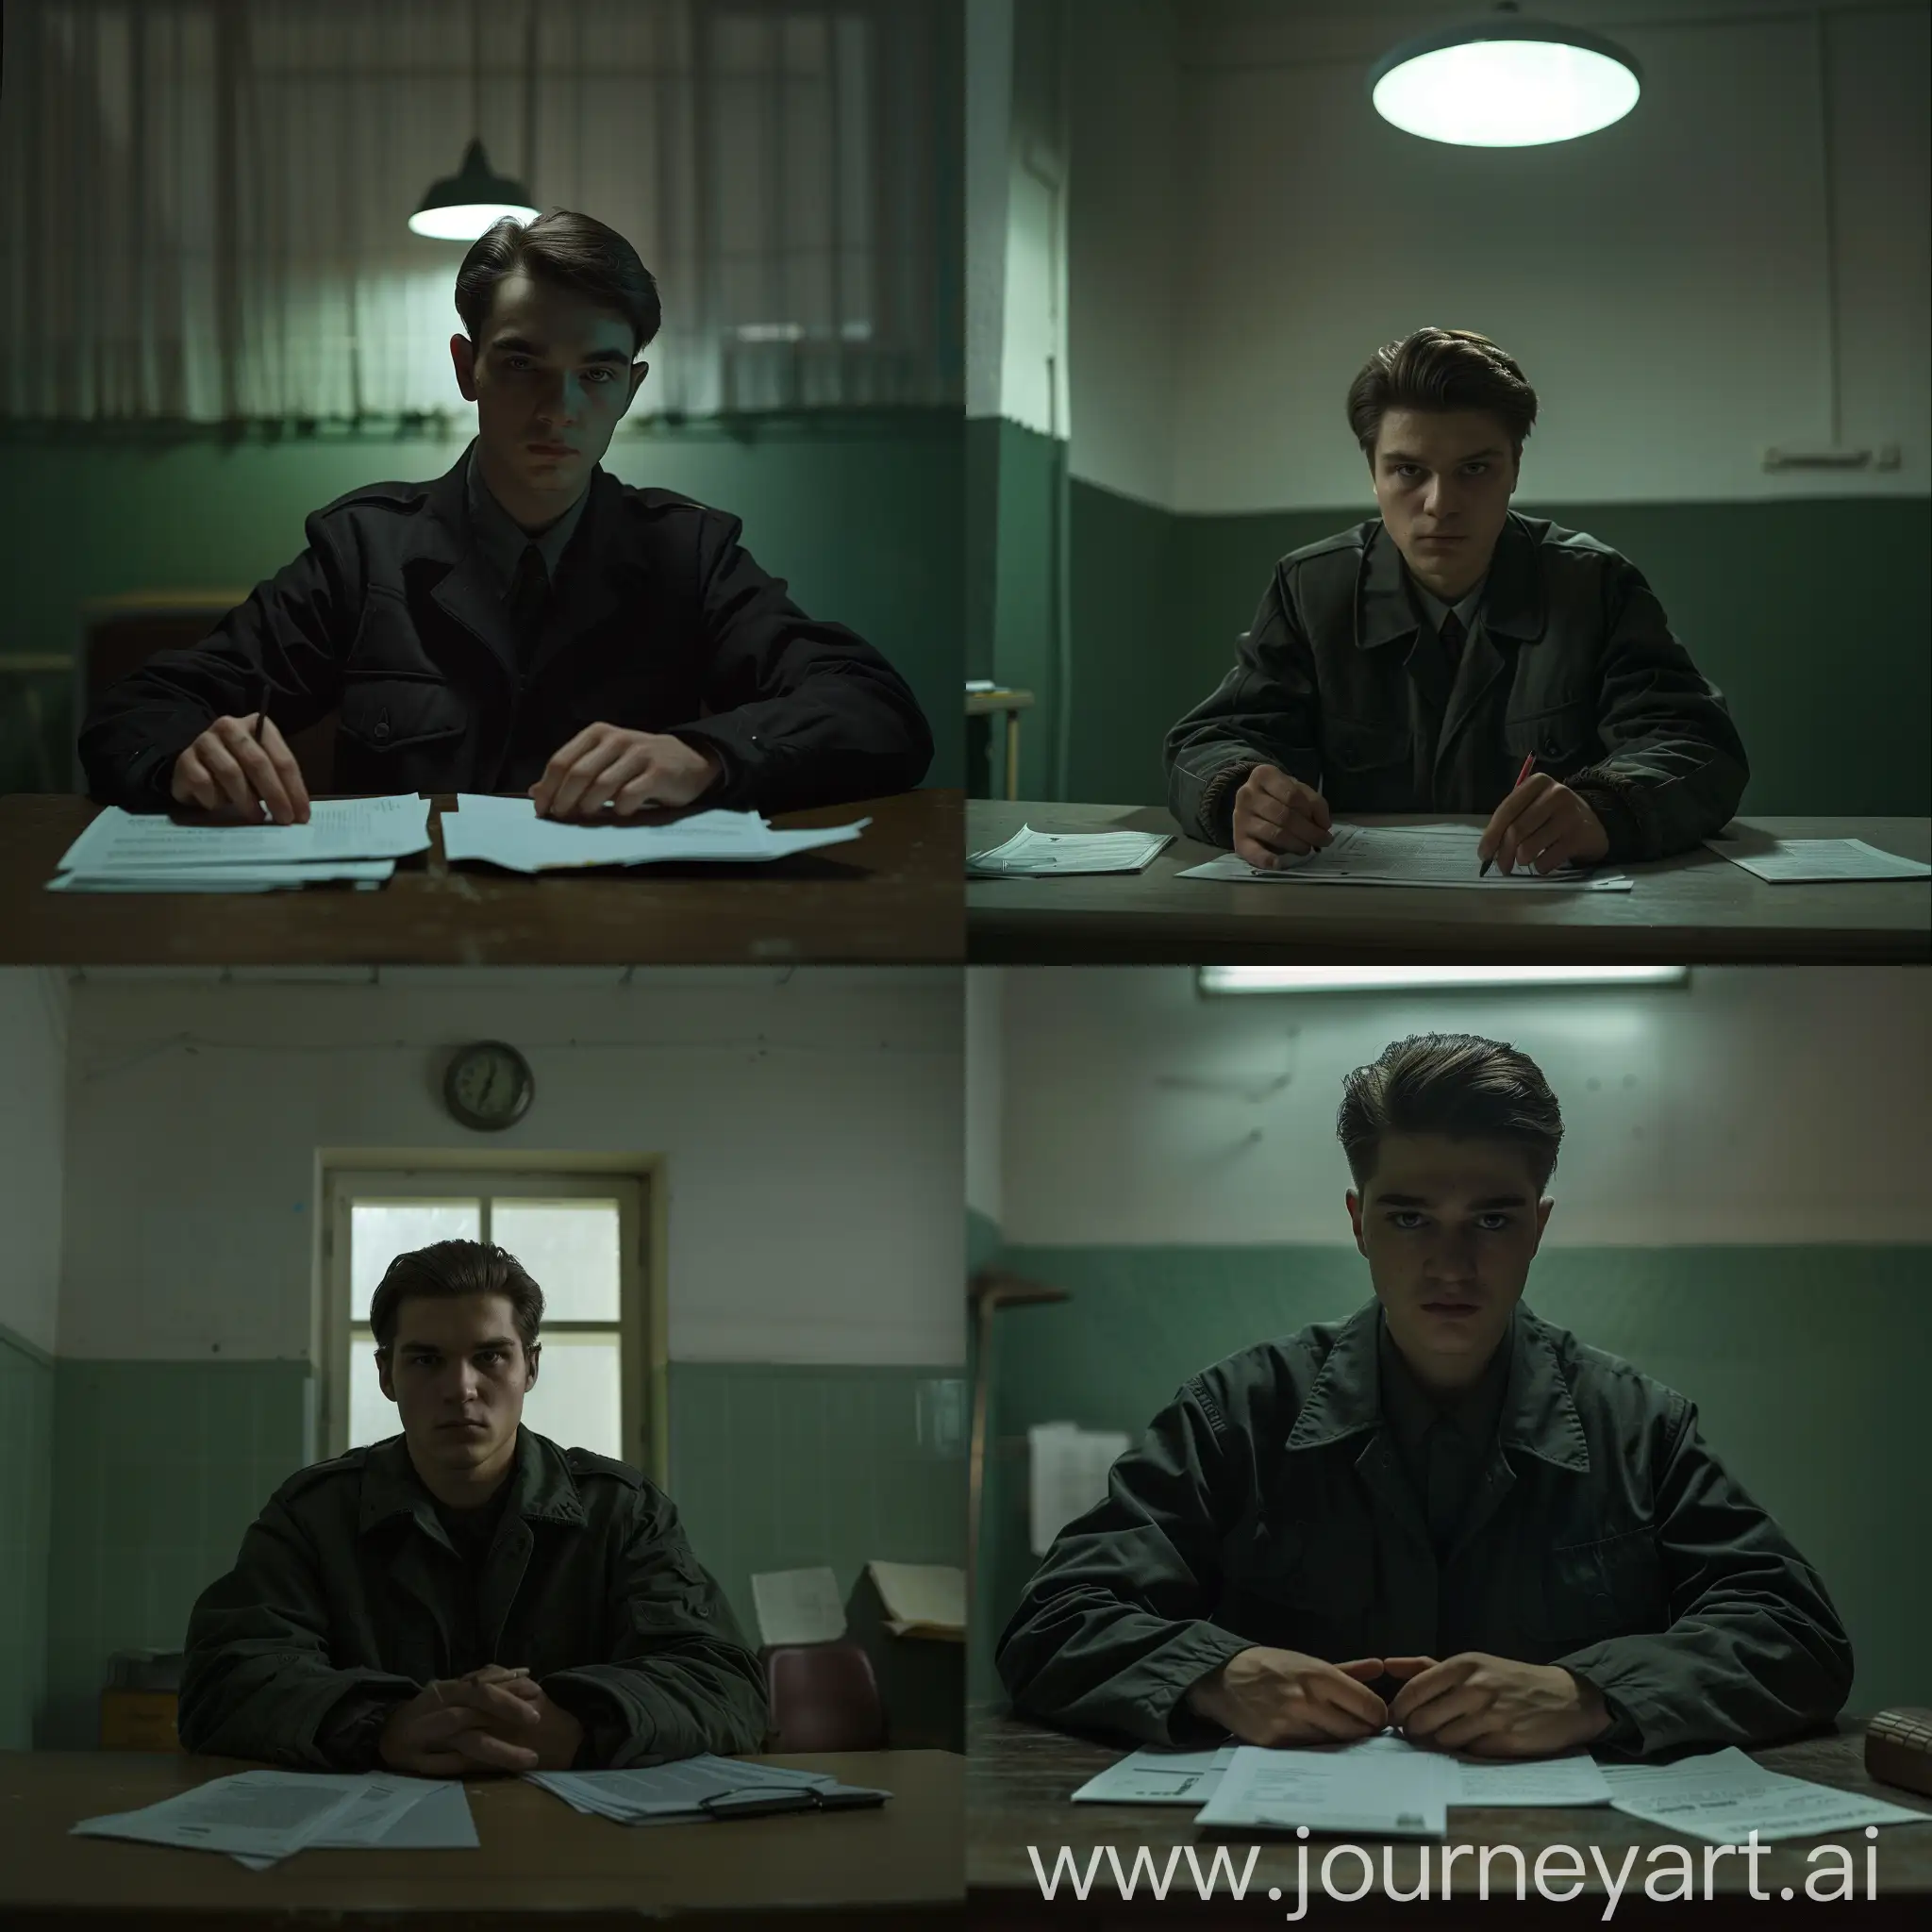 Soviet-Office-Interior-with-Serious-Young-Man-at-Desk